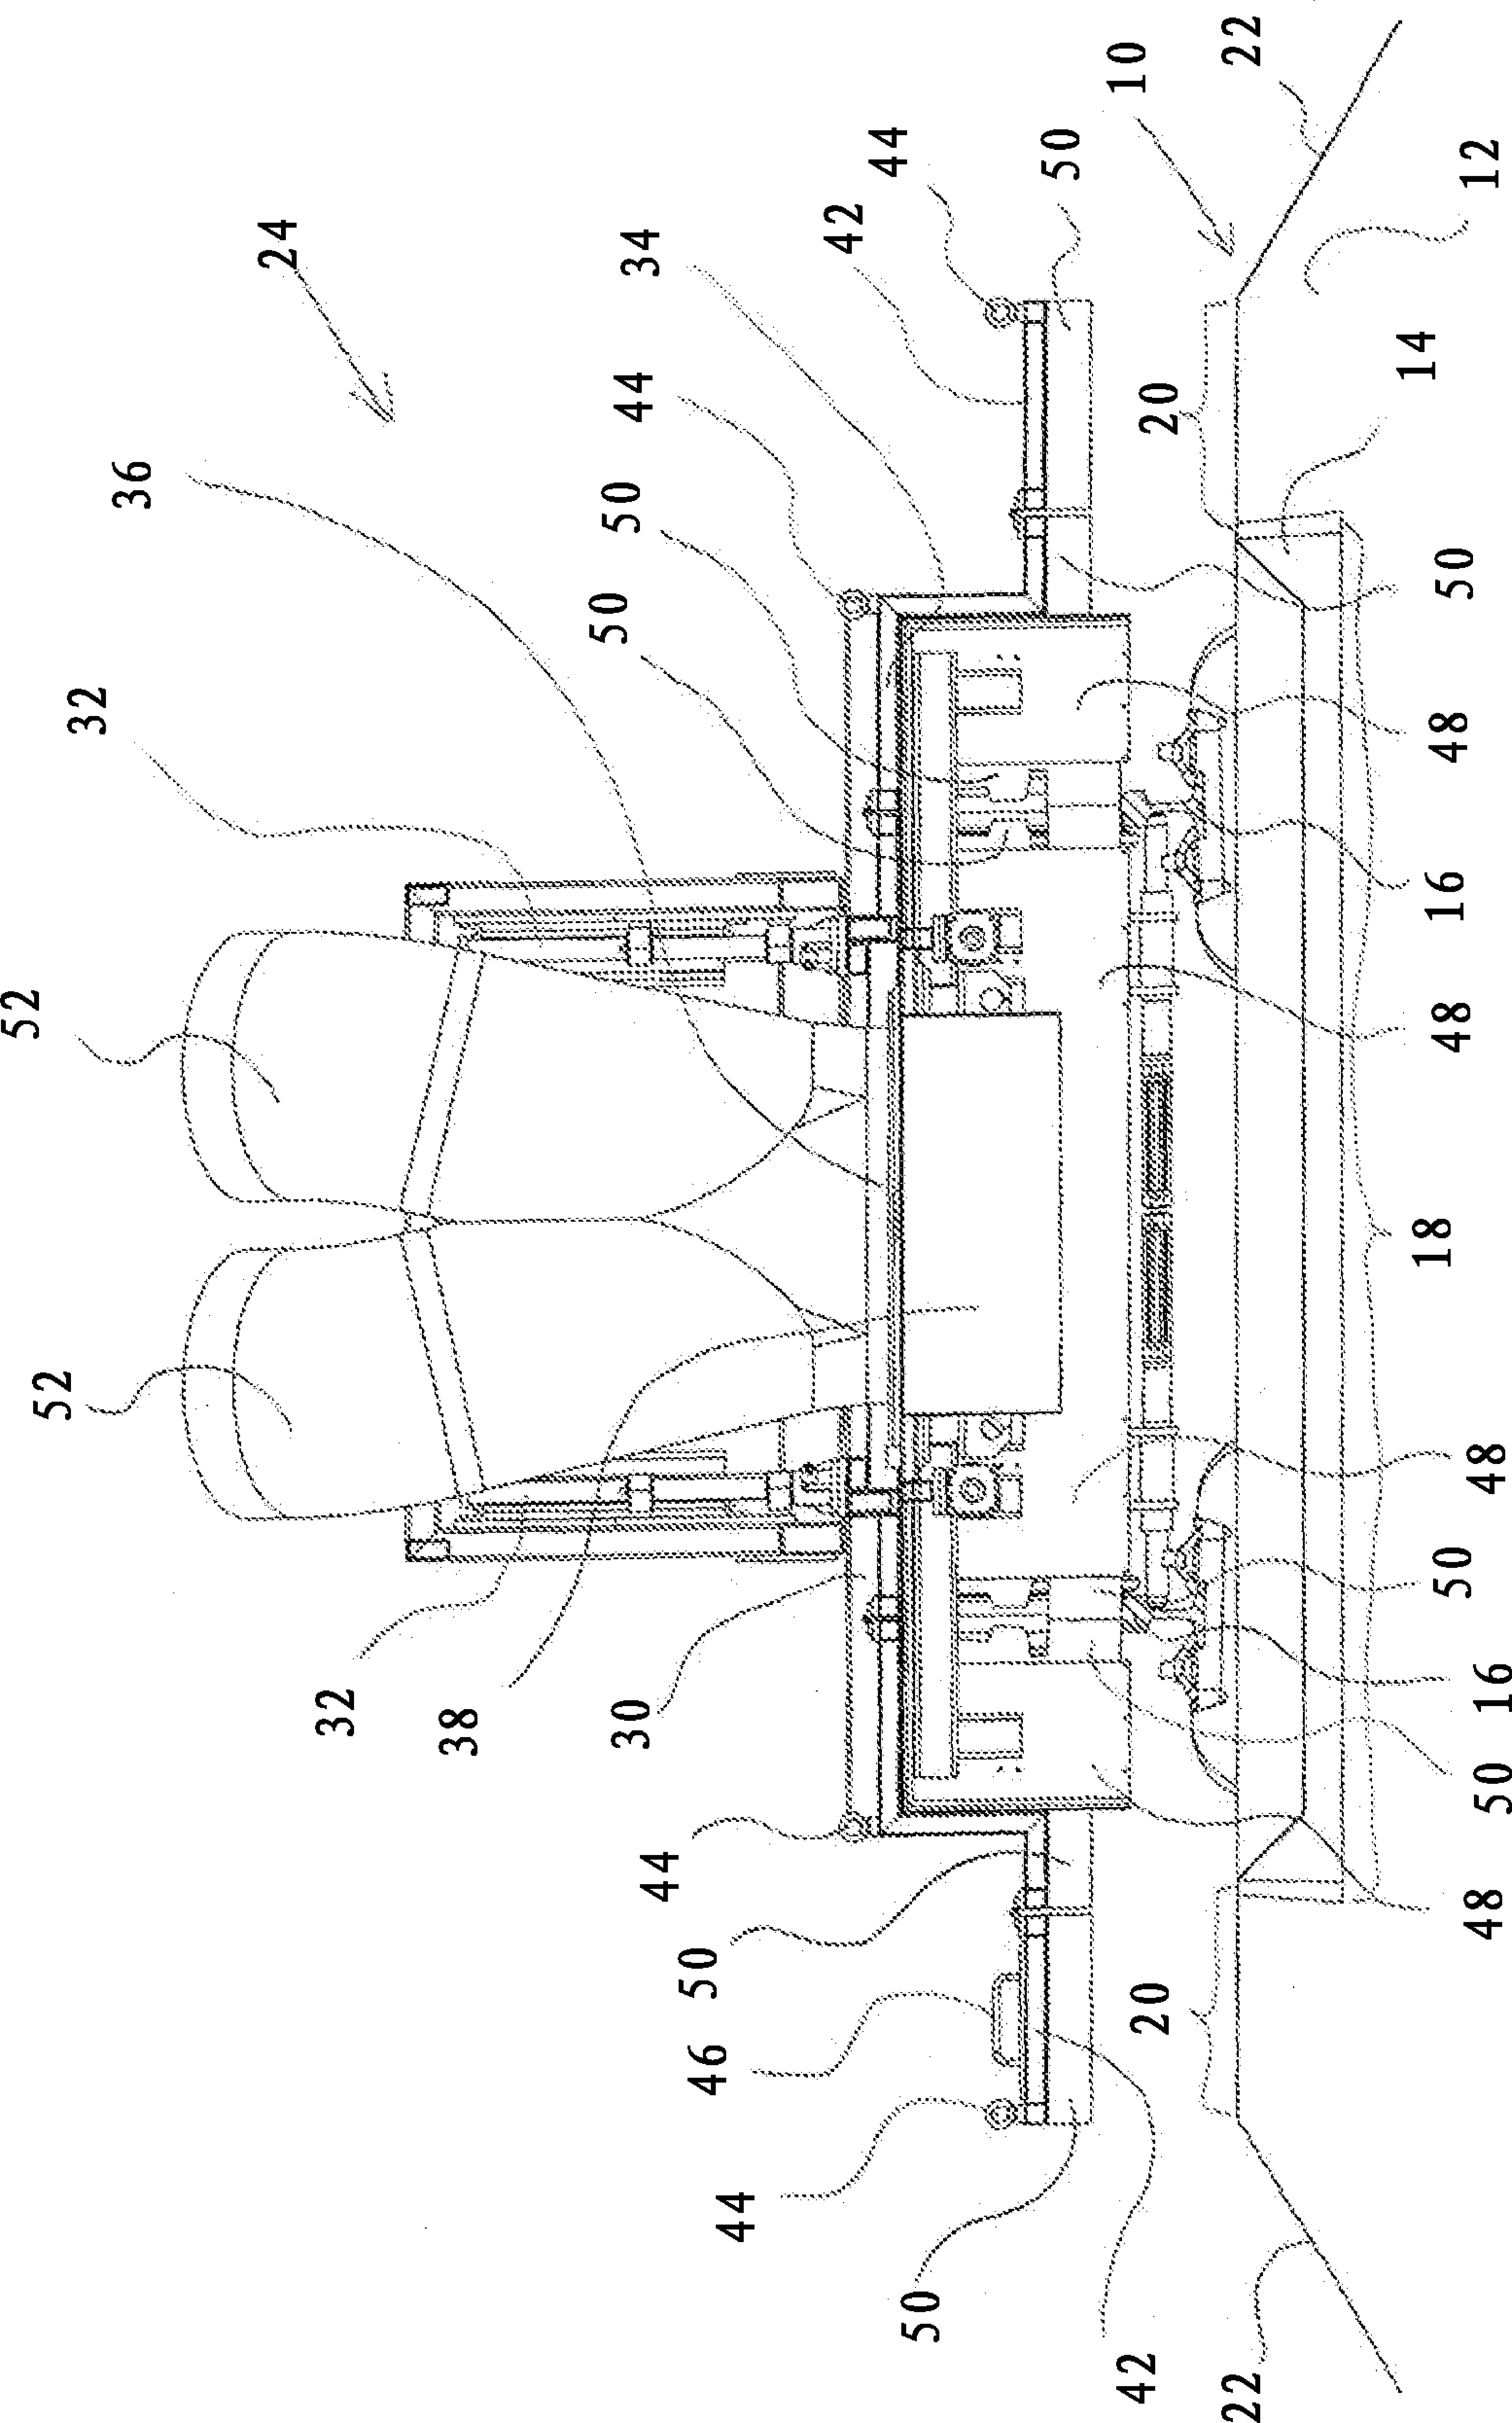 Conditioning device and method for drying and controlling the temperature of a ballast bed